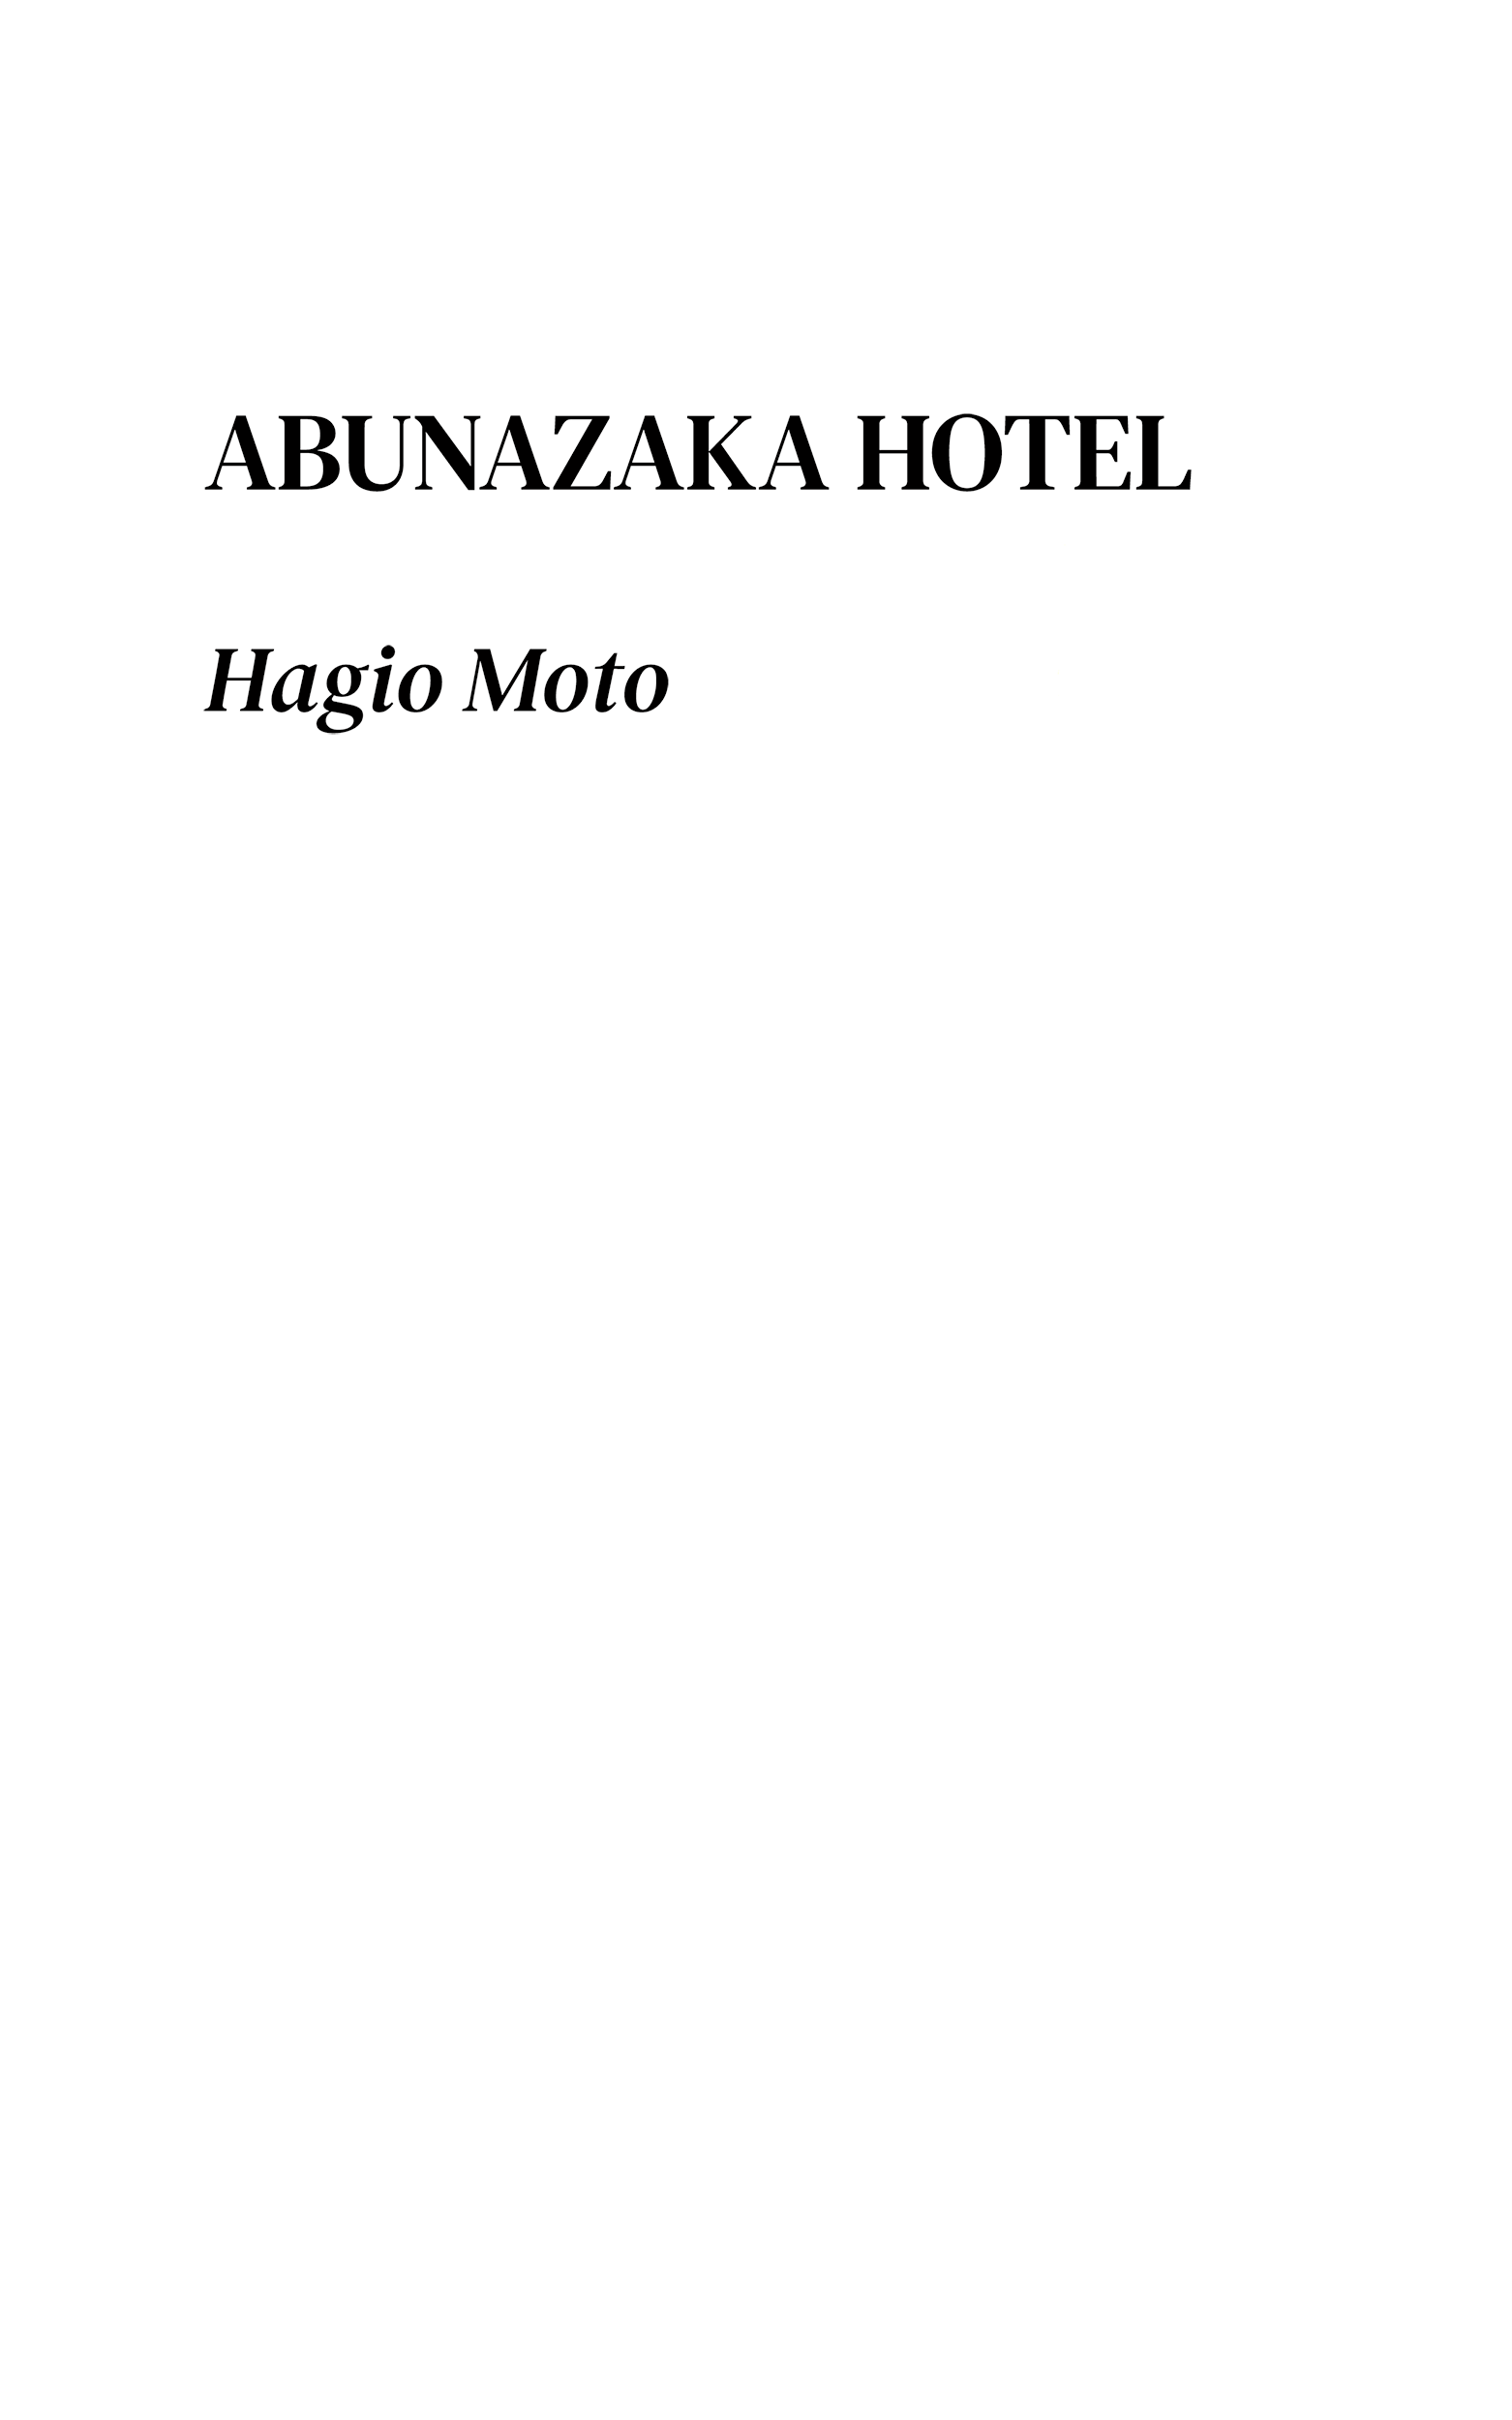 The Hotel On The Dangerous Hill Vol.1 Chapter 1: The People Of The Abunazaka Hotel - Picture 2